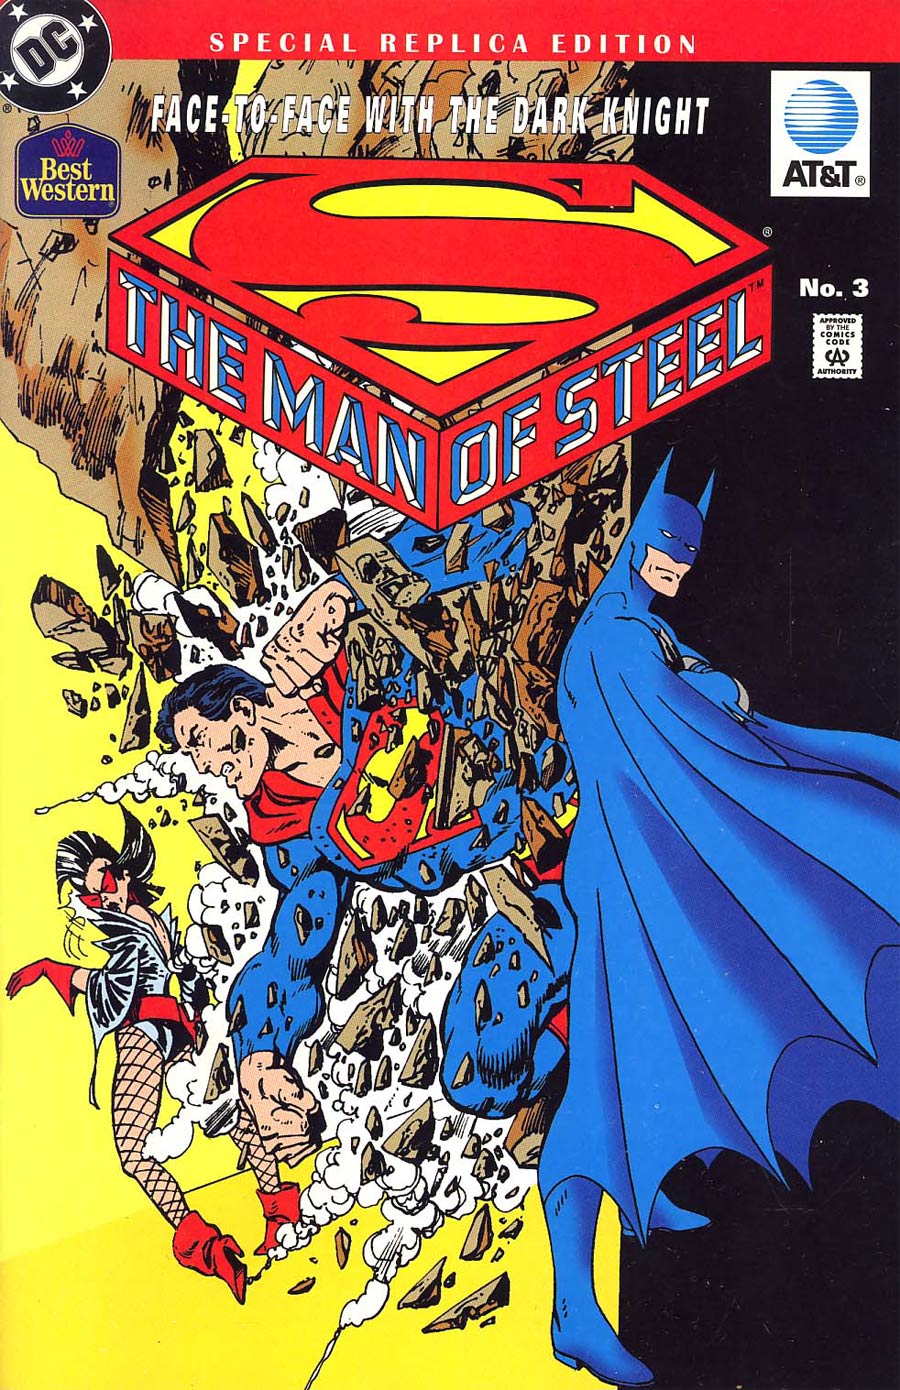 Man Of Steel #3 Cover D Best Western AT&T Promo